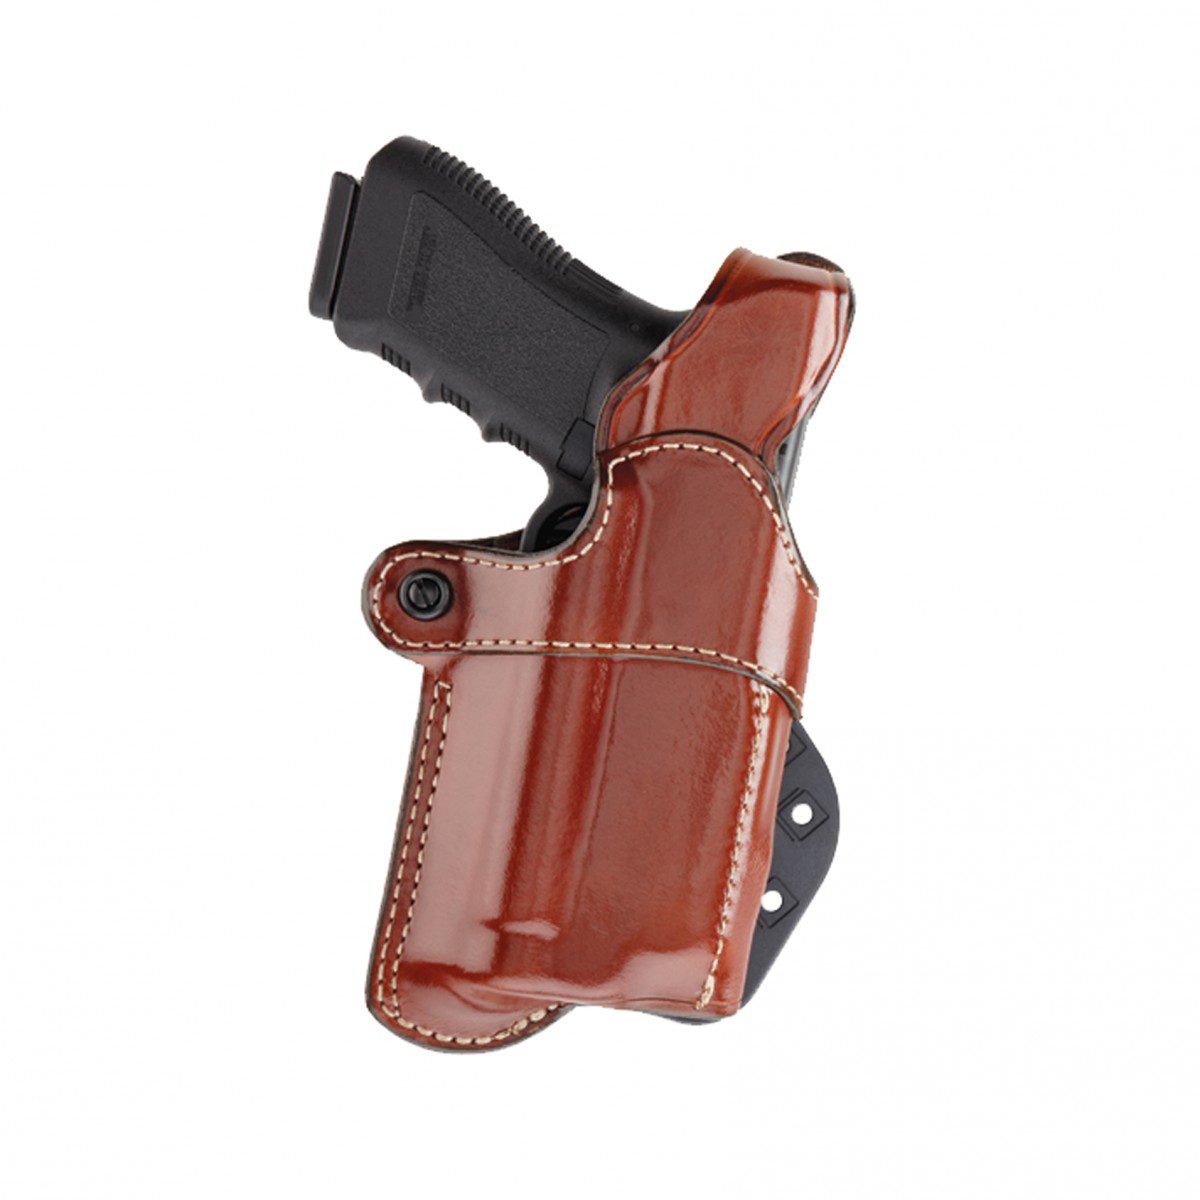 Aker Leather Nightguard™ Paddle Holster 267 - Tactical & Duty Gear